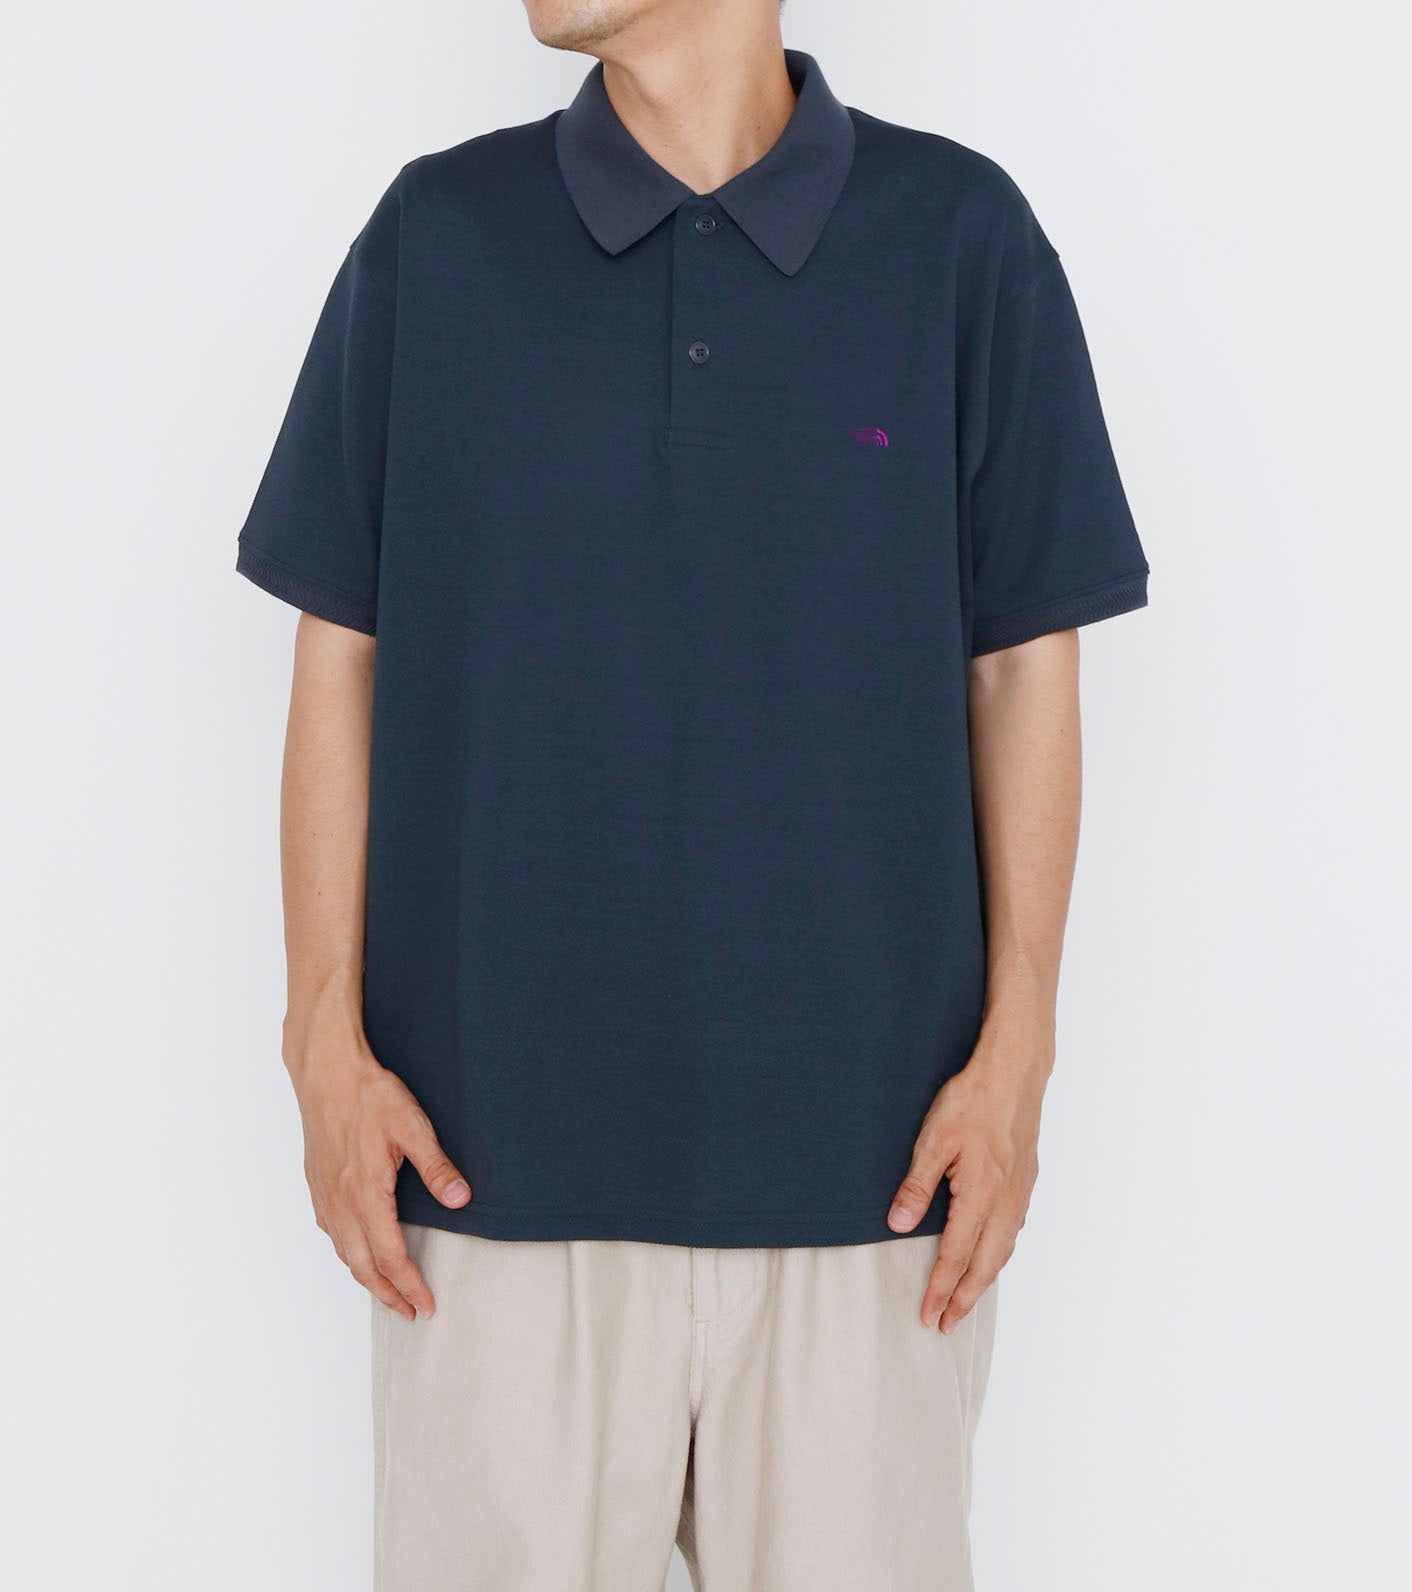 THE NORTH FACE PURPLE LABEL Moss Stitch Field Short Sleeve Polo